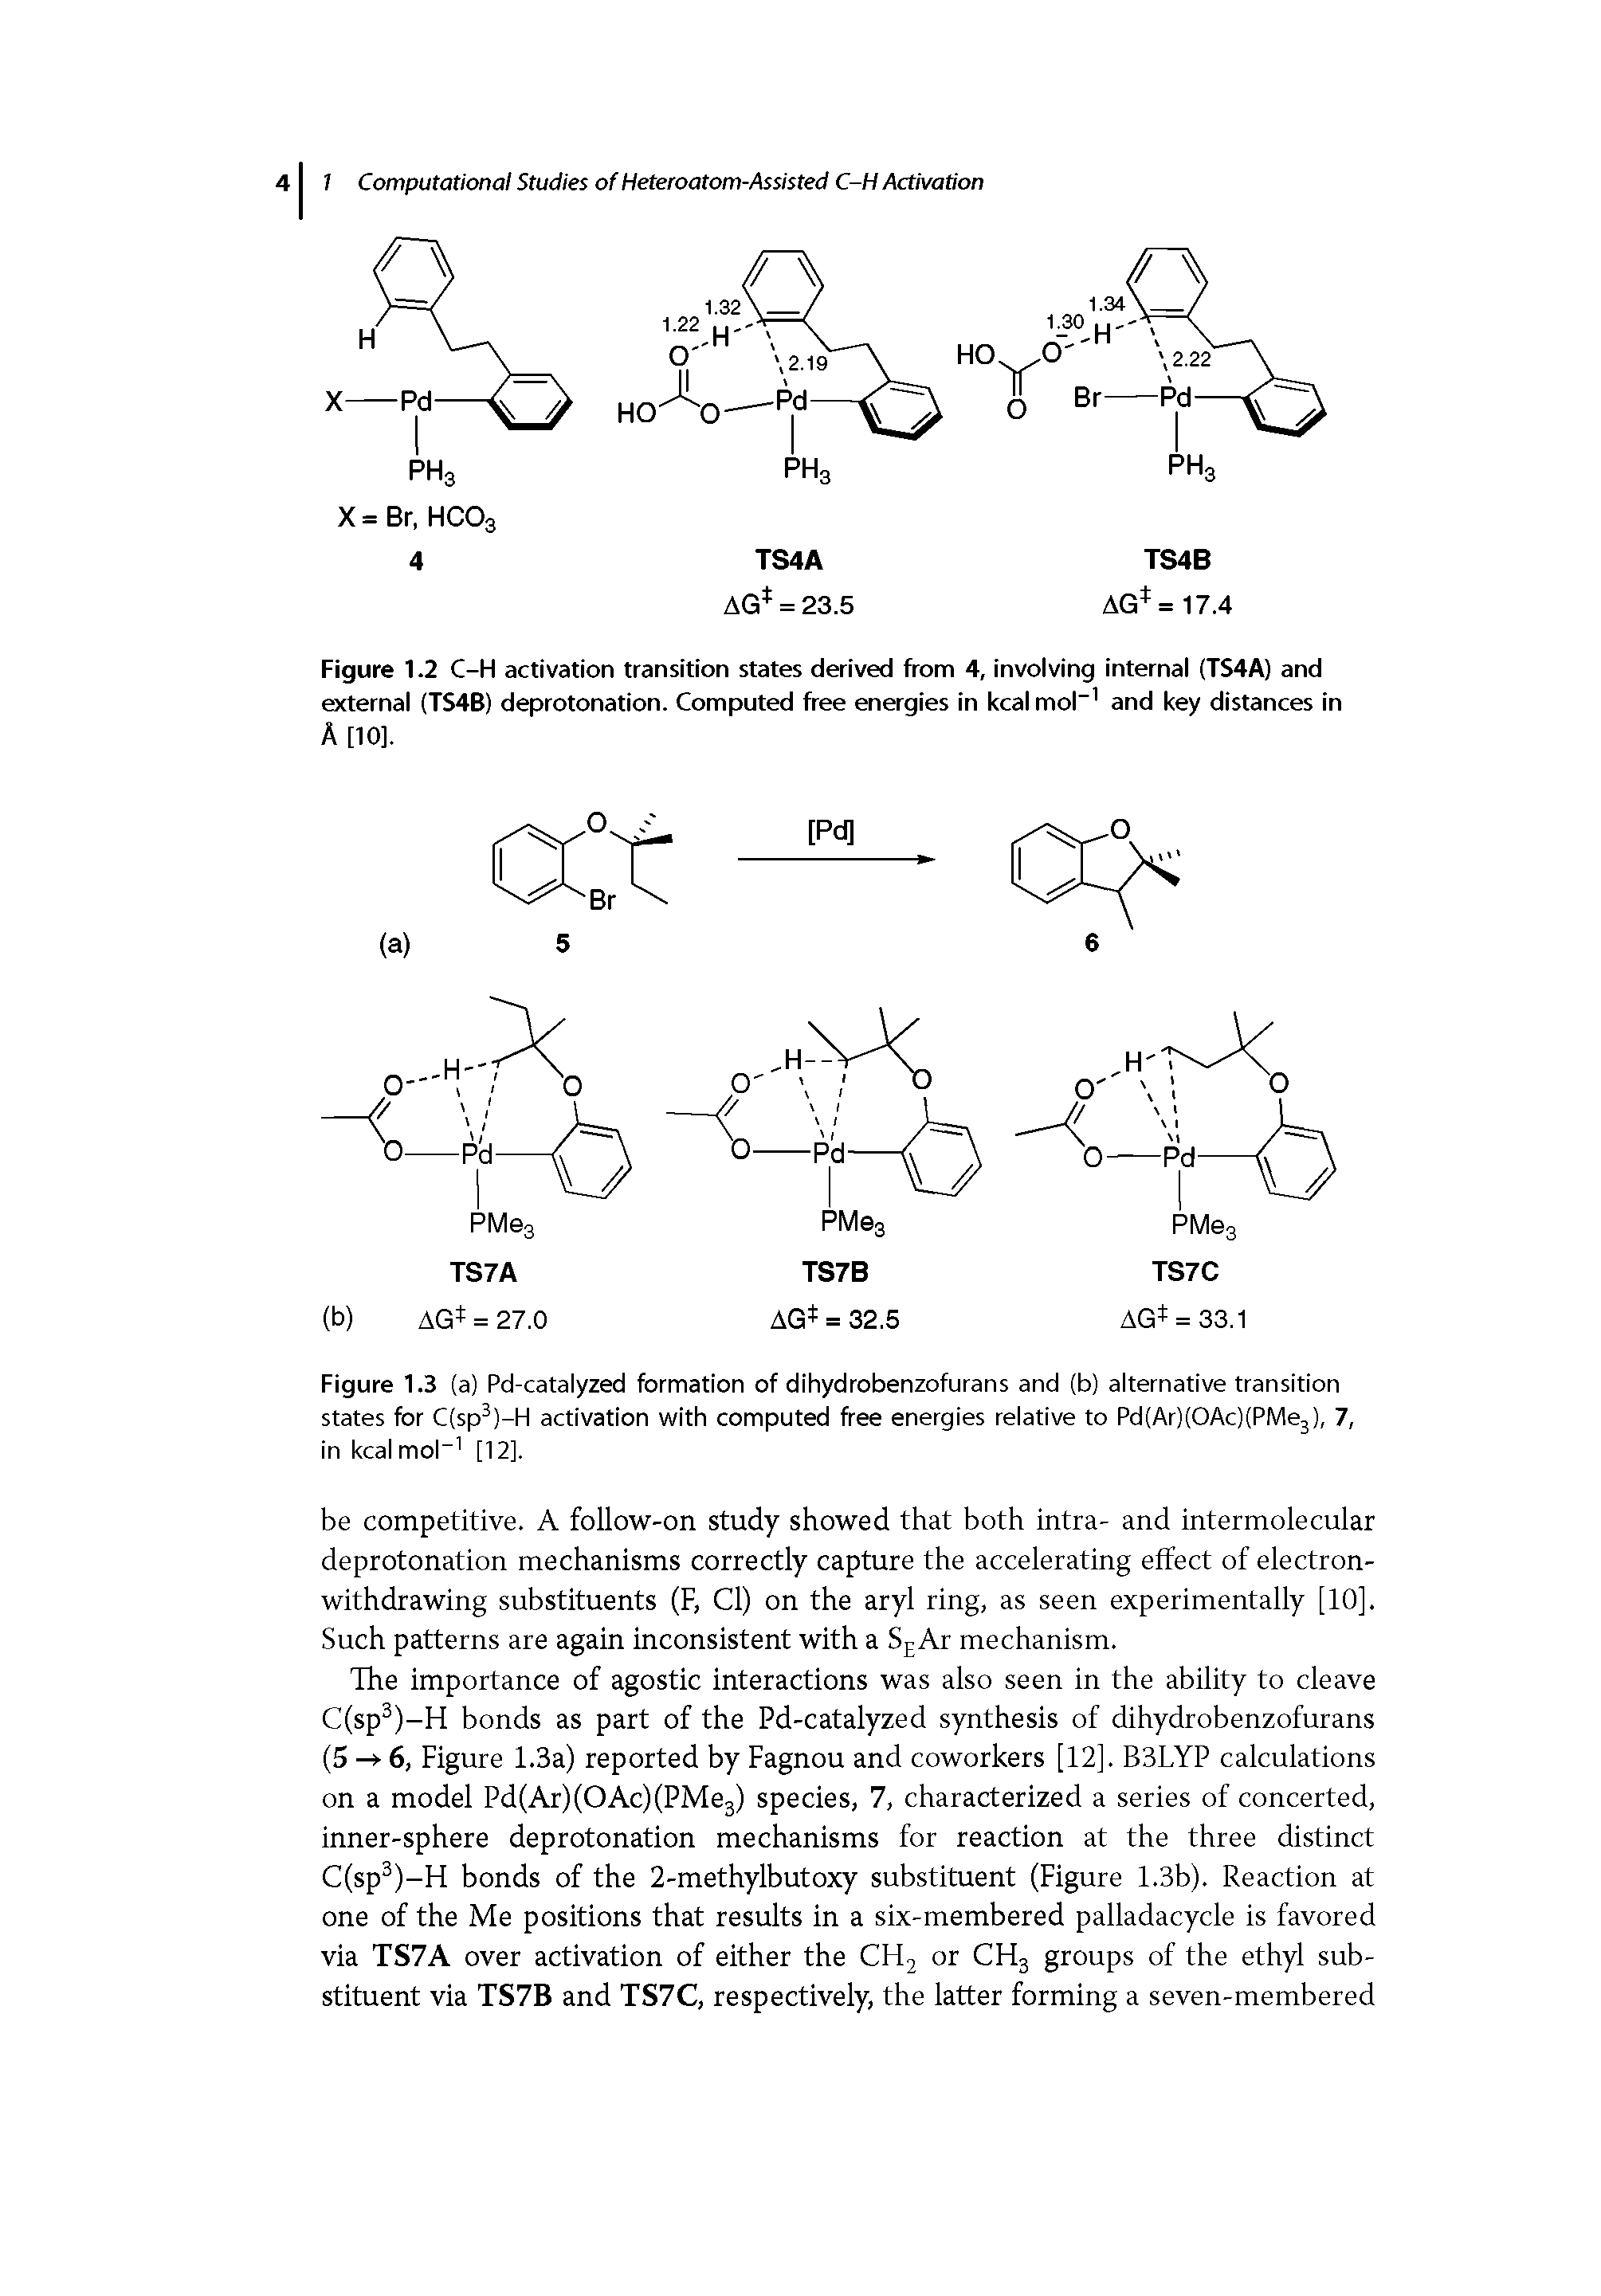 Figure 1.2 C-H activation transition states derived from 4, involving internal (TS4A) and external (TS4B) deprotonation. Computed free energies in kcal mol" and key distances in...